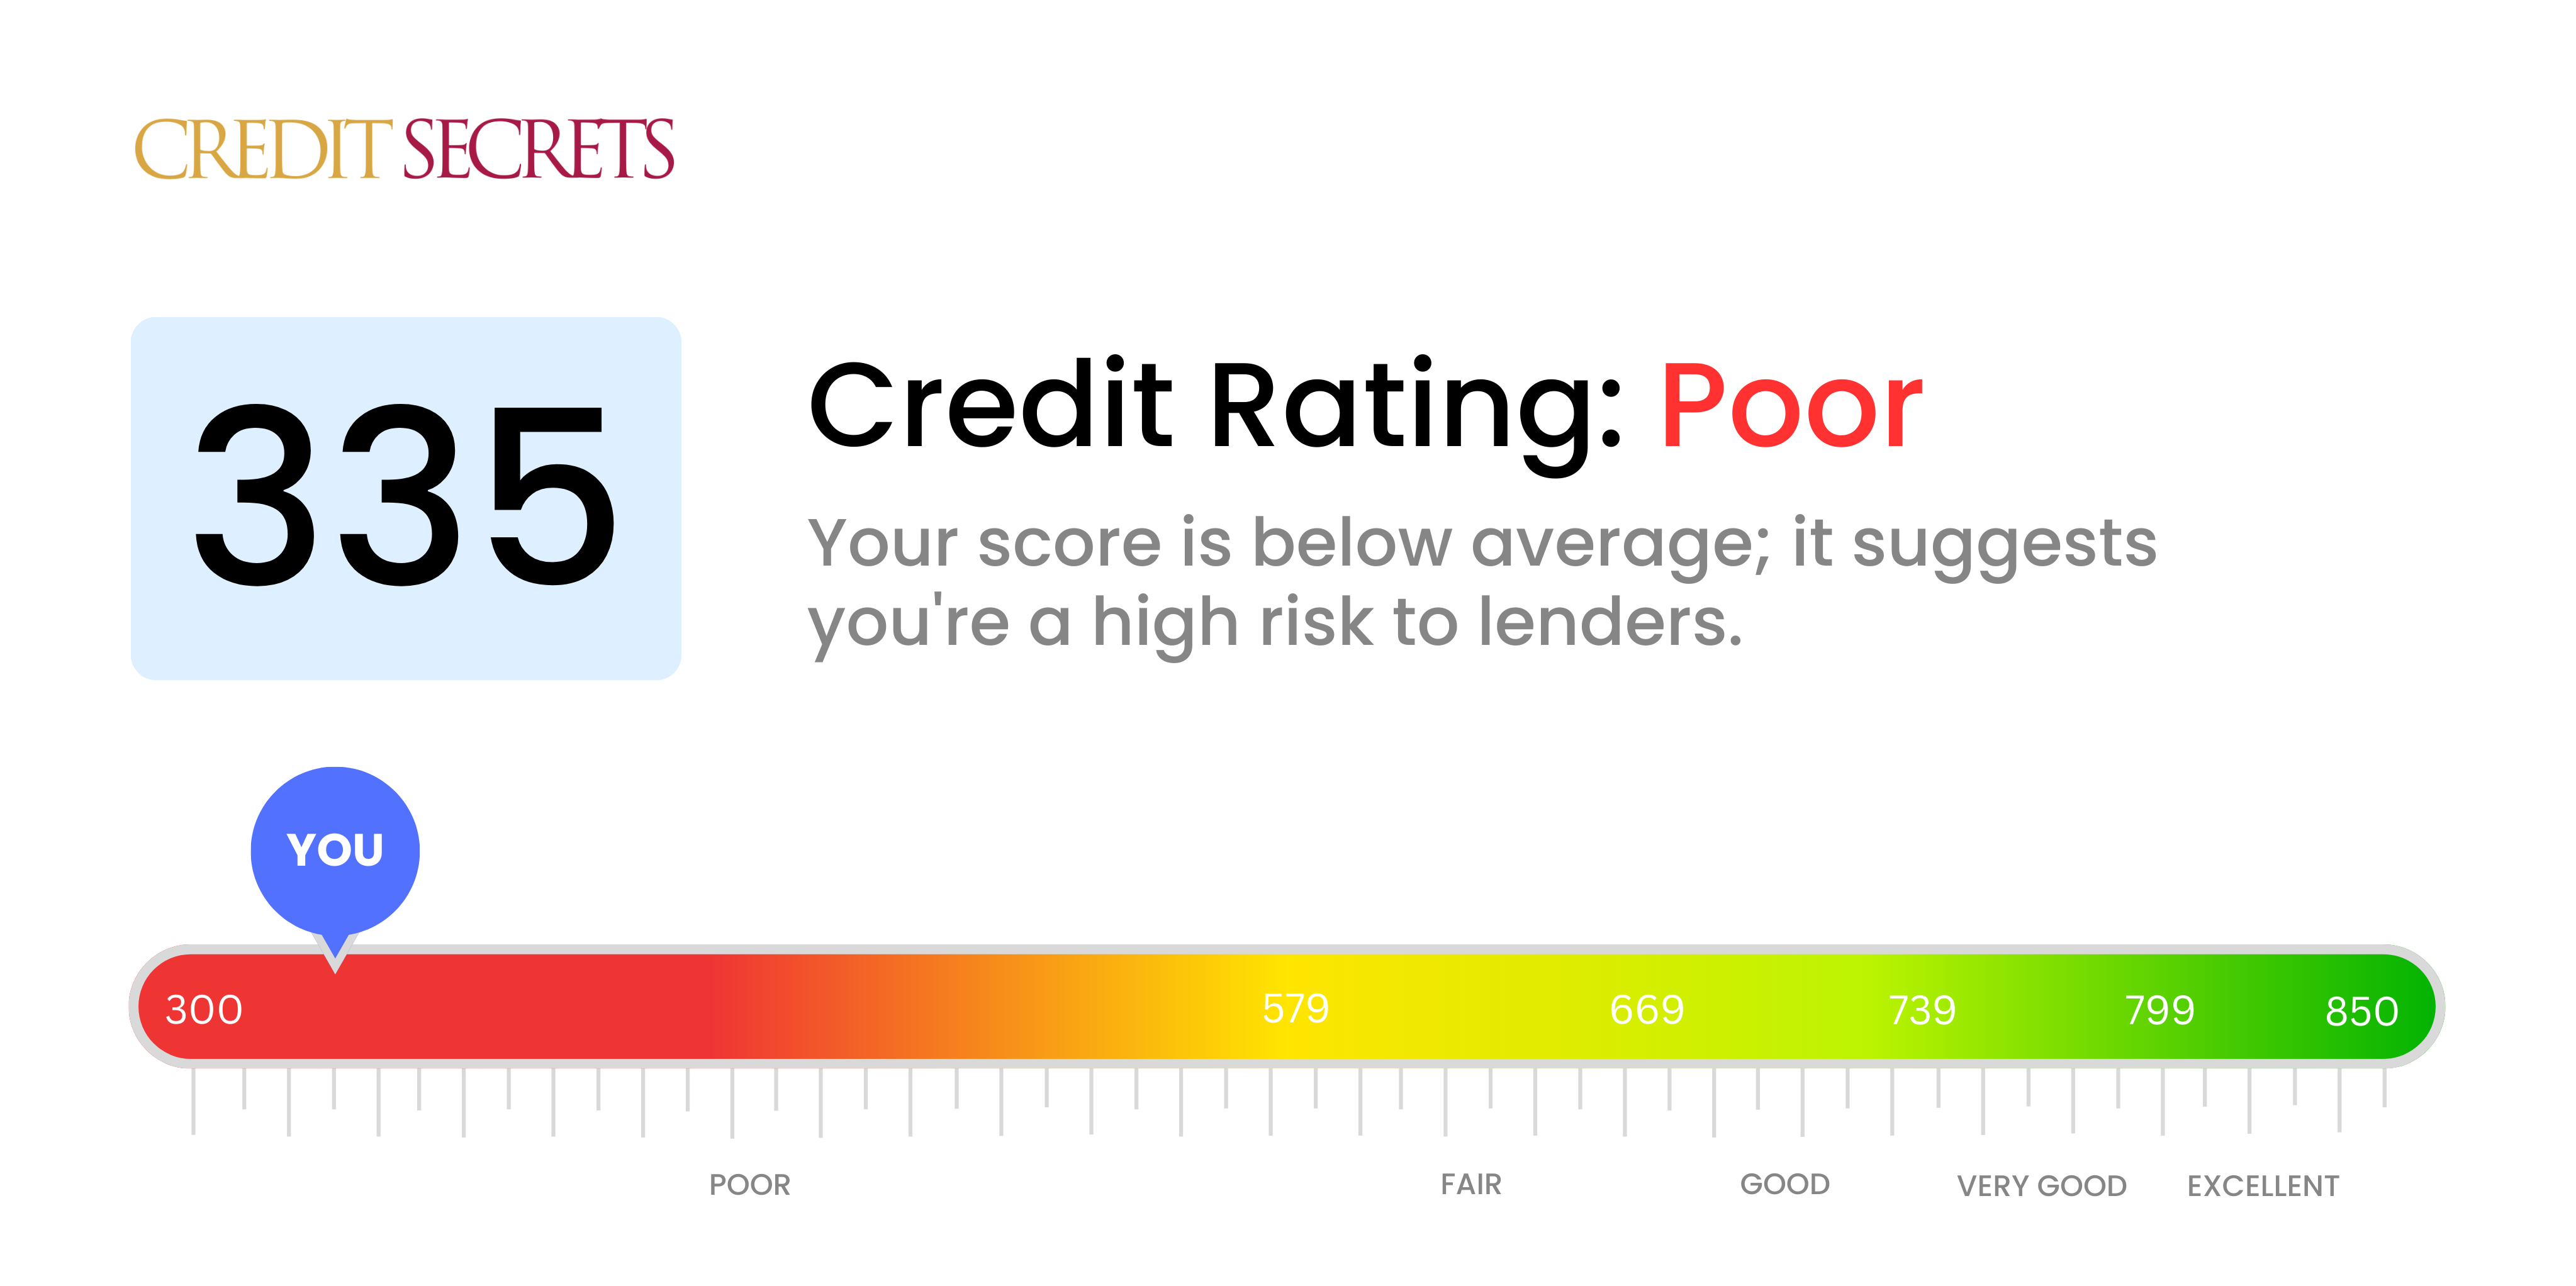 Is 335 a good credit score?